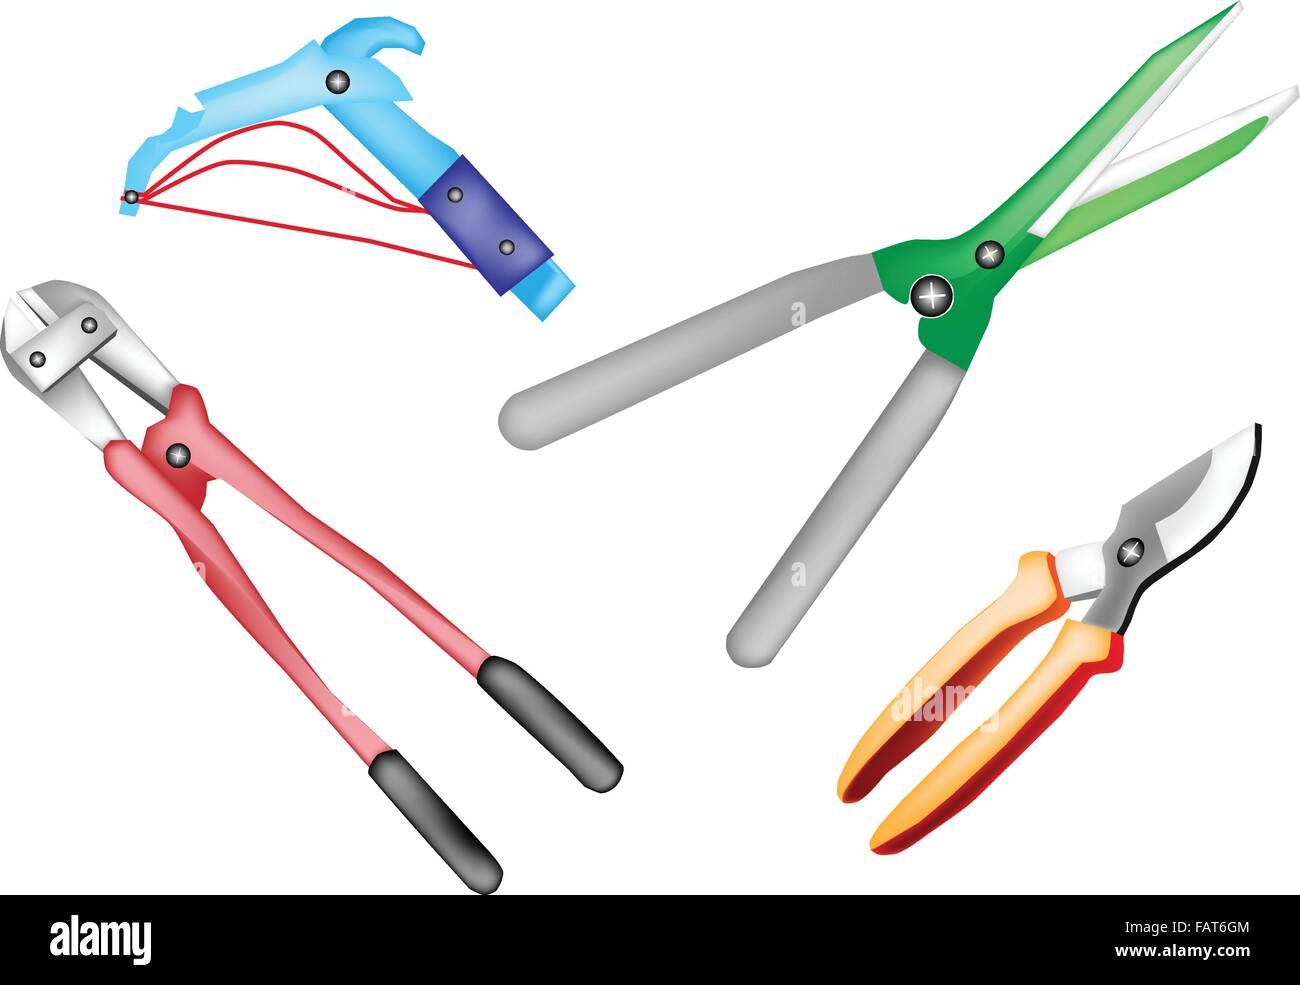 Gardening Equipment and Cutting Tools, An Illustration Collection of Loppers and Pruners Isolated On White Background Stock Vector